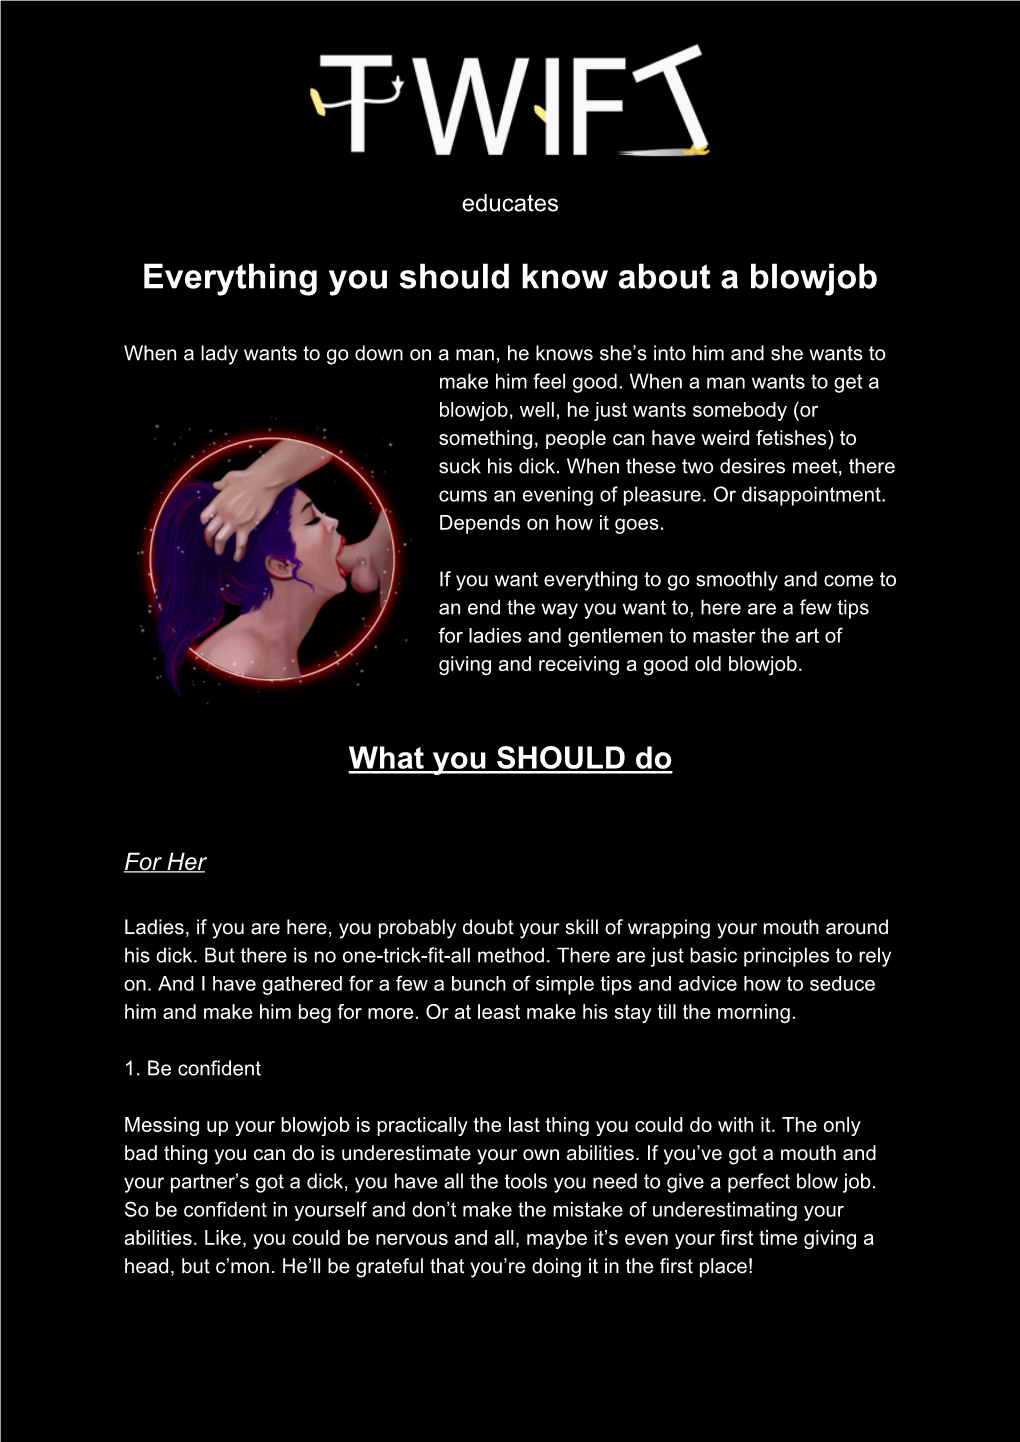 Everything You Should Know About a Blowjob